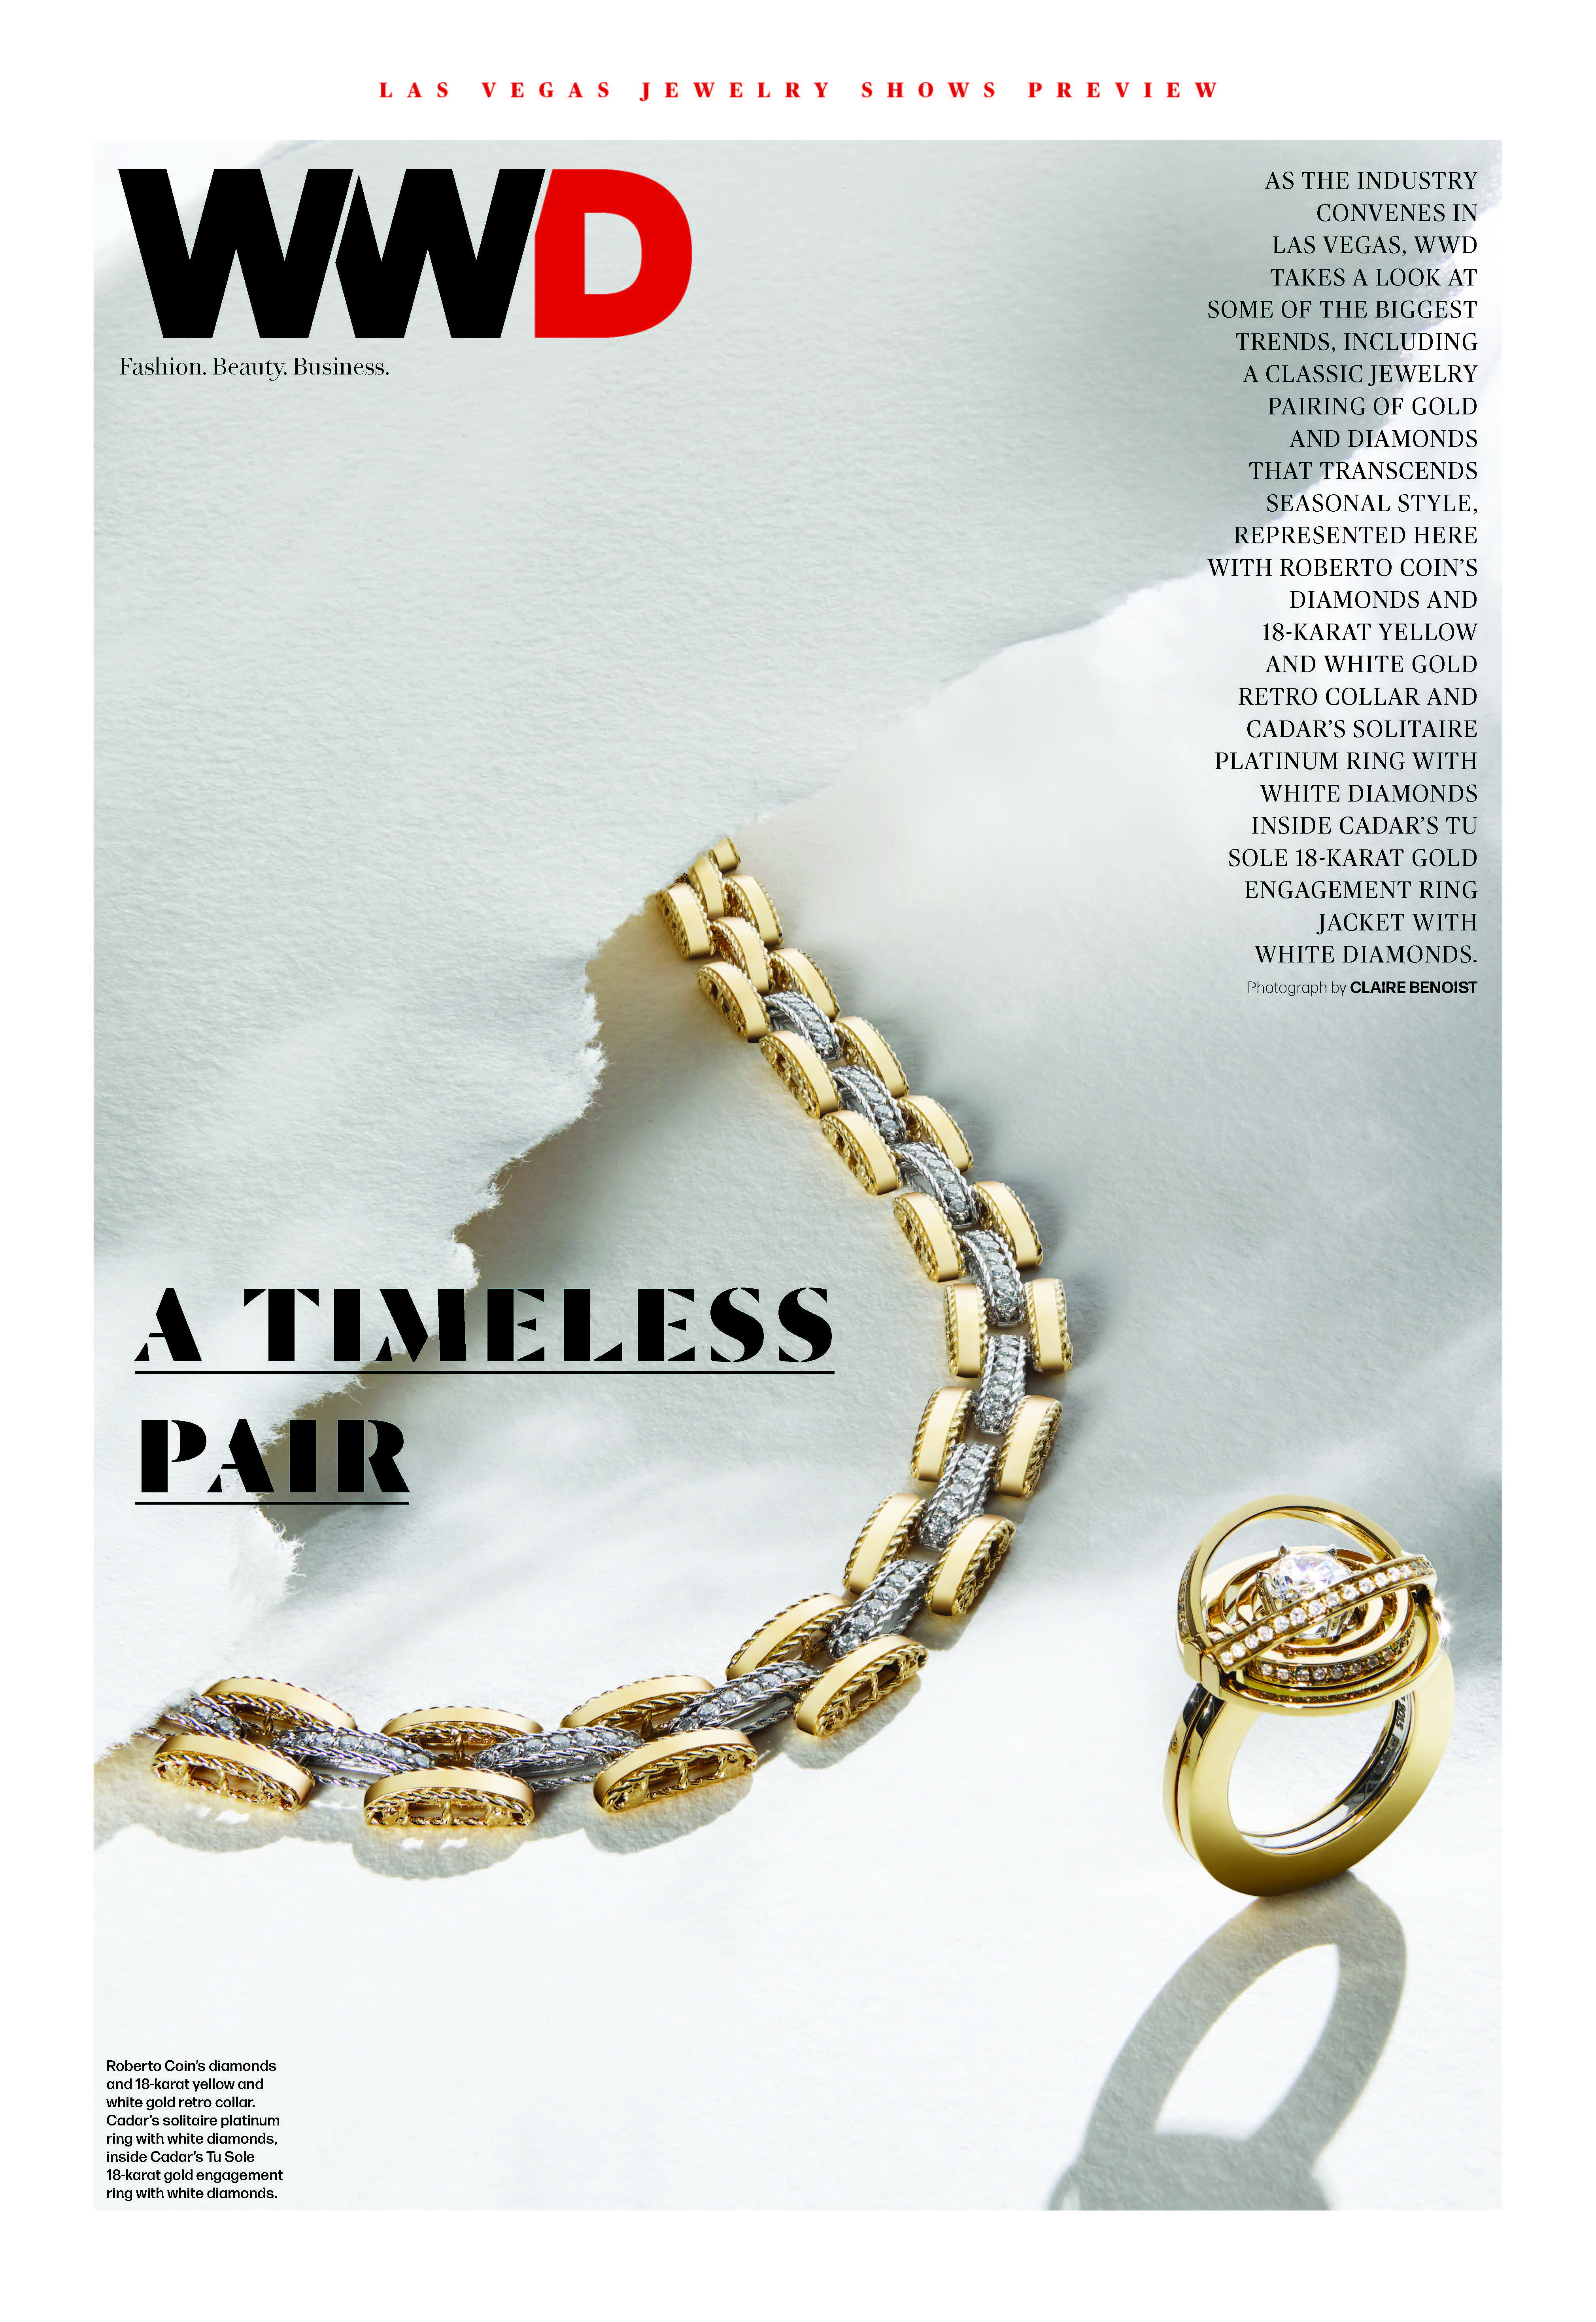 WATCHES AND JEWERLY_WWD_JCK_Cover